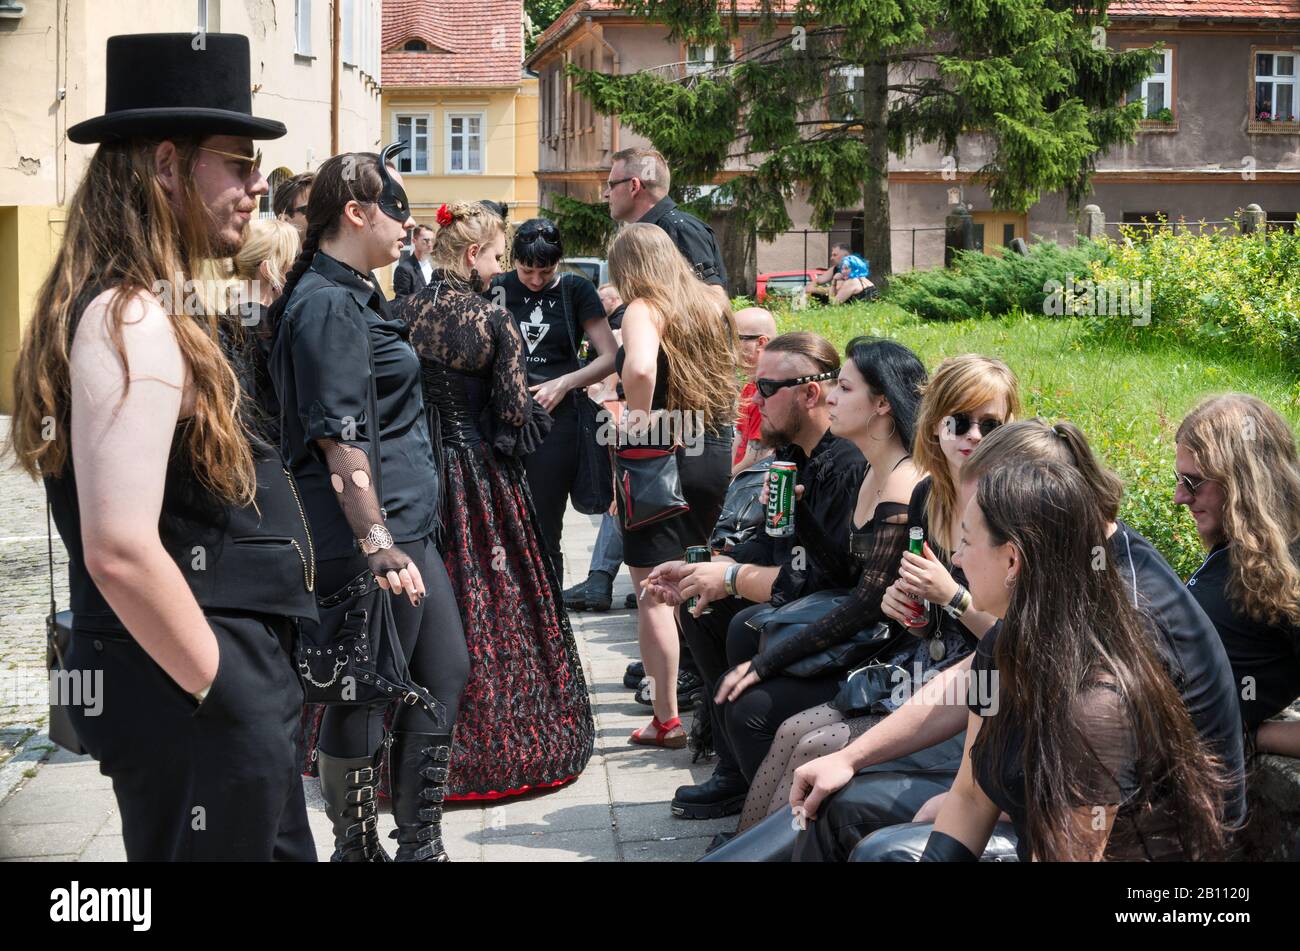 Castle Party participants, Gothic Festival dedicated to the goth subculture, organized at medieval castle in Bolkow, Lower Silesia, Poland Stock Photo